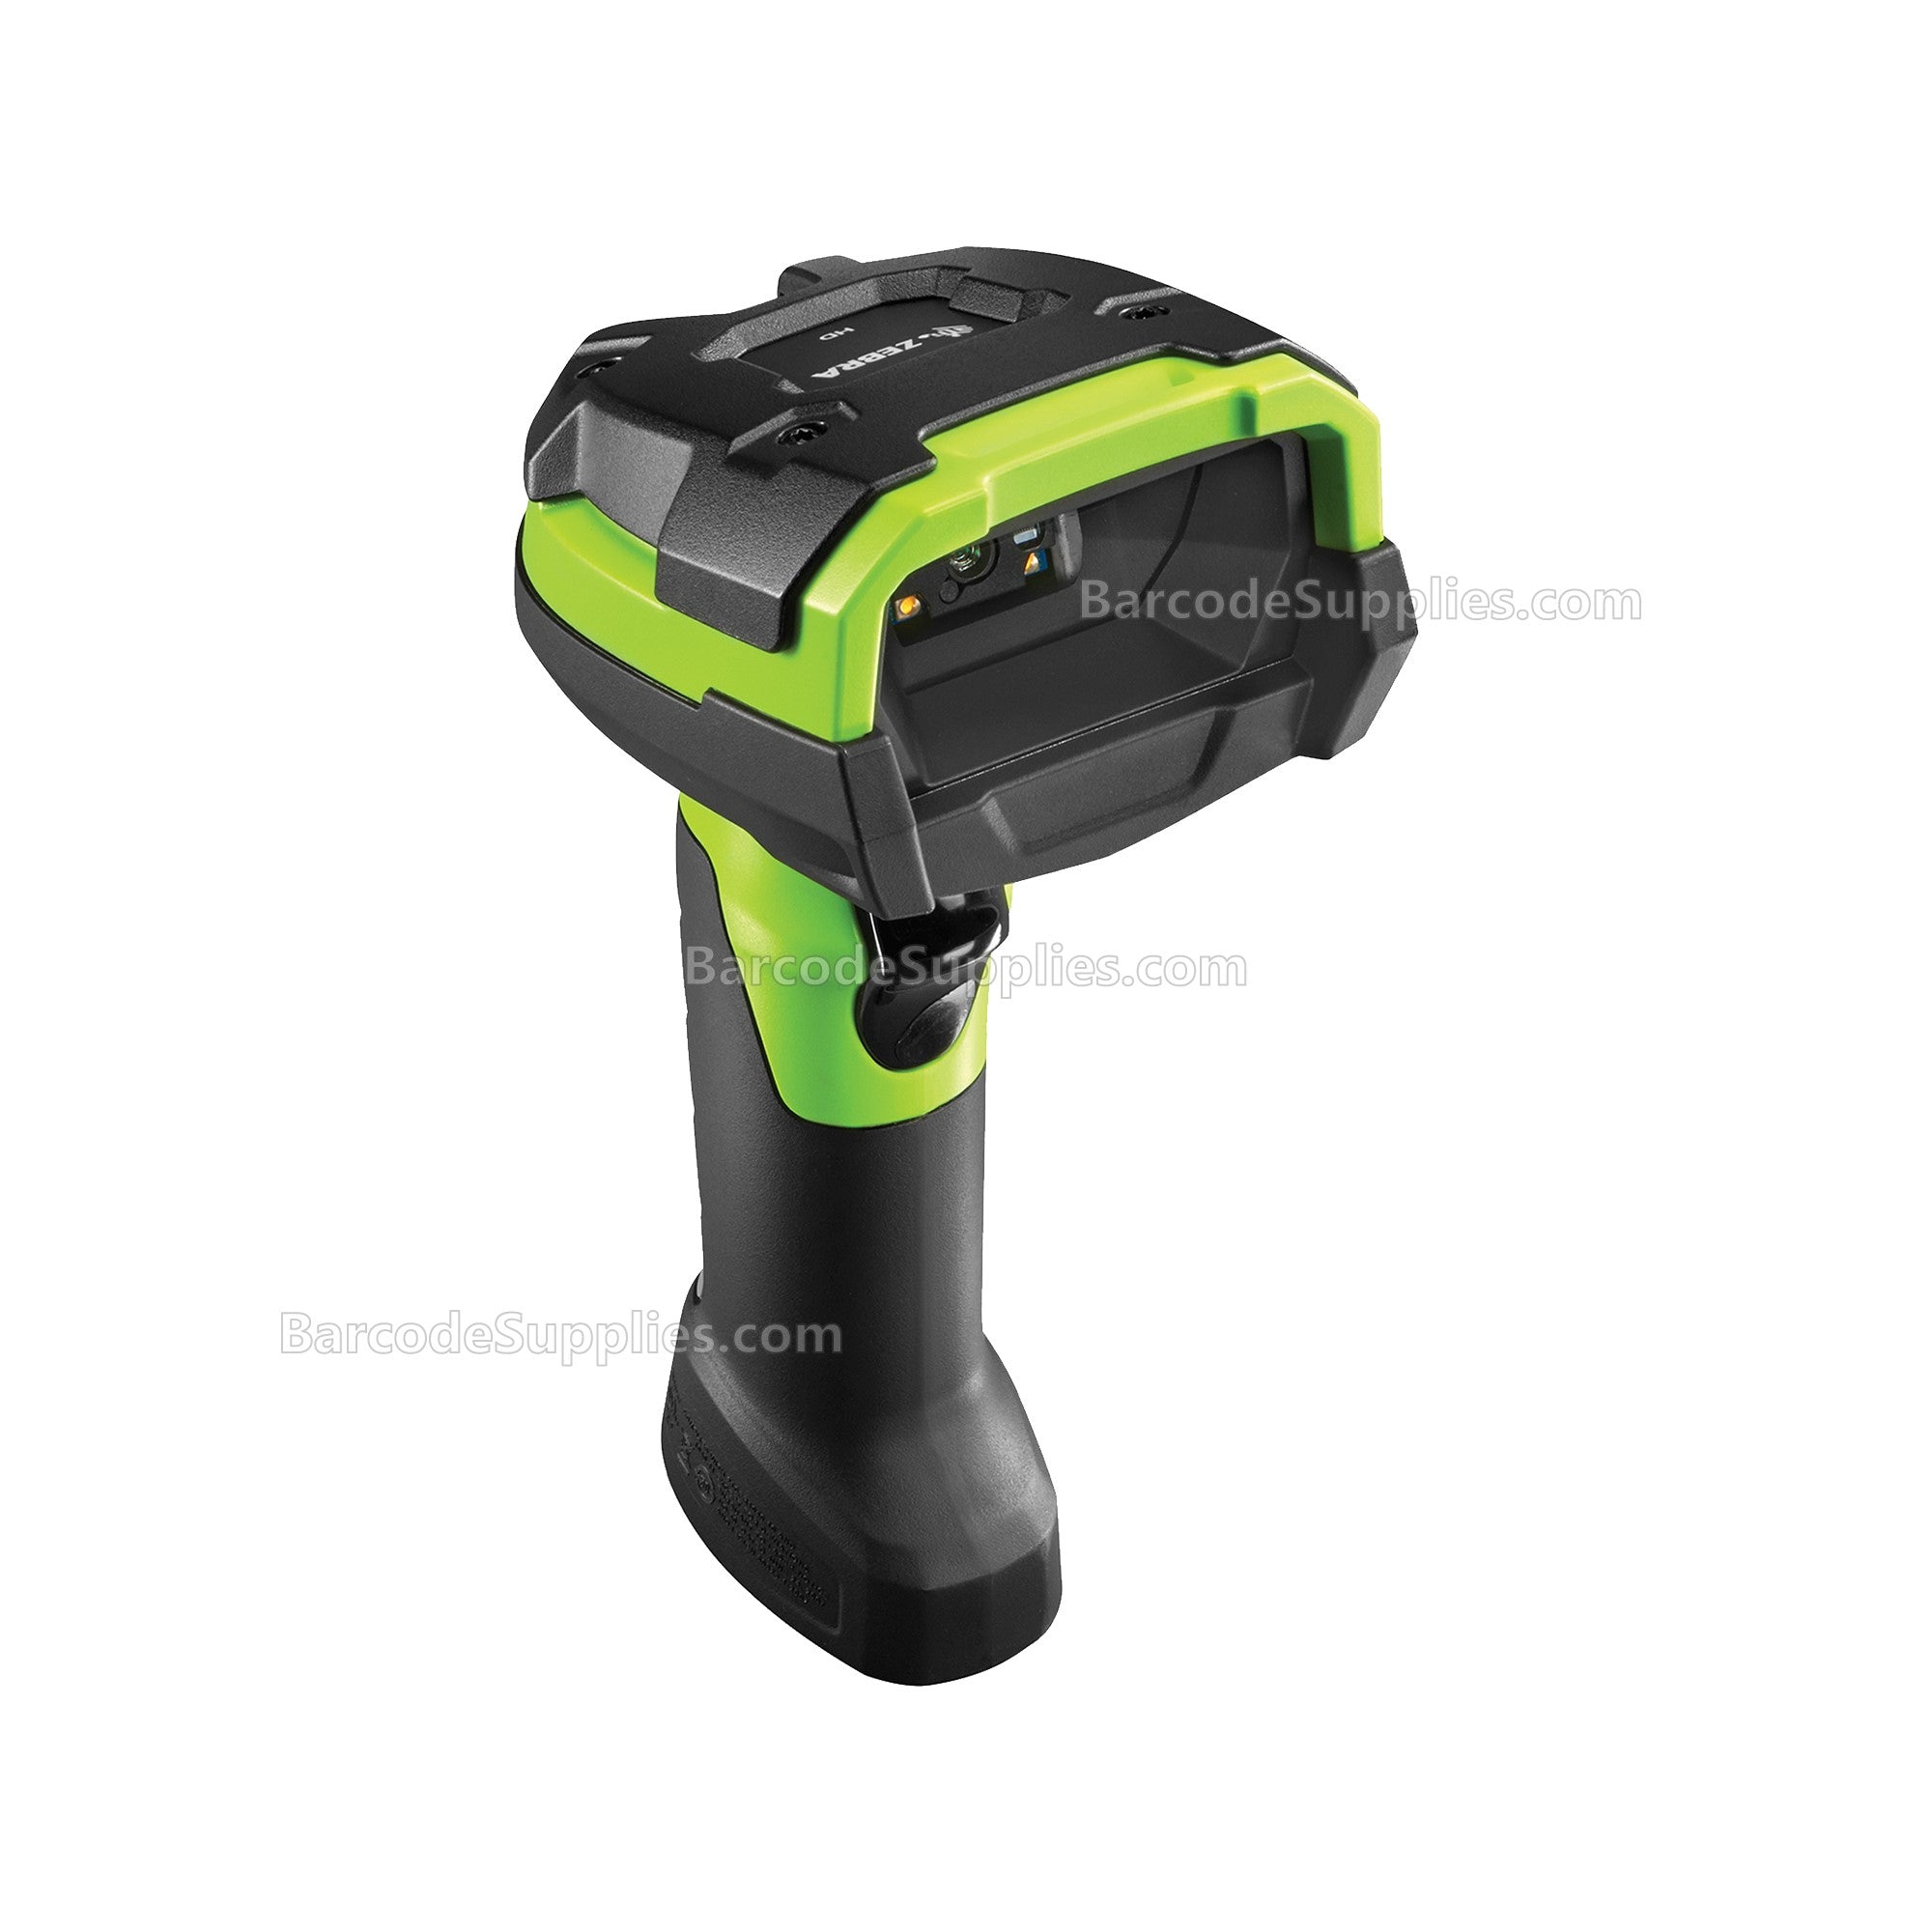 Zebra DS3678: Rugged, Area Imager, High Performance, Cordless, Fips, Industrial Green, Vibration Motor